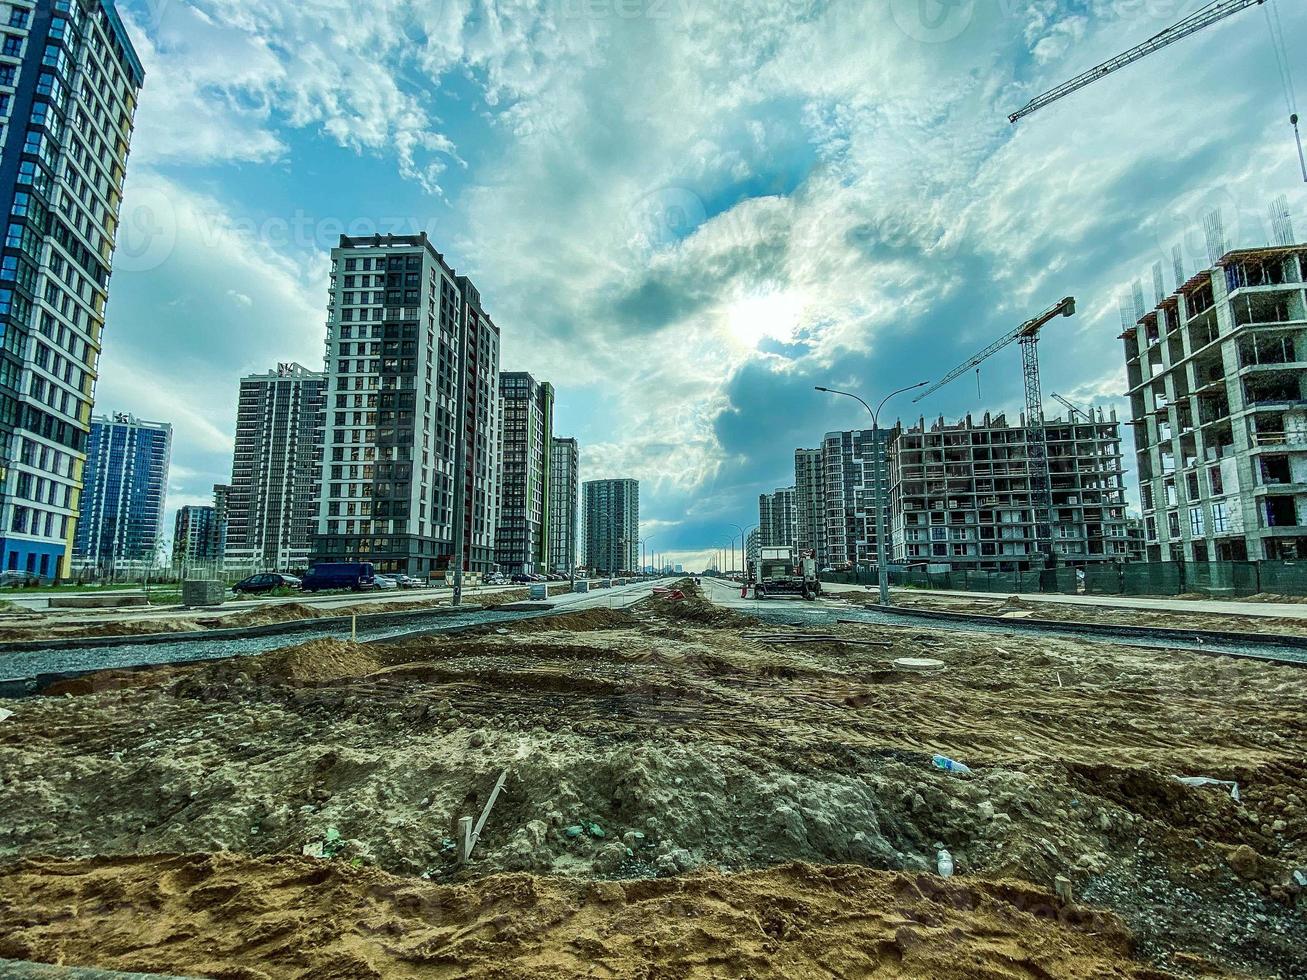 construction of a new residential complex in the city center. high houses made of concrete and glass for people's lives. they lay a road nearby and prepare the soil for laying the material photo